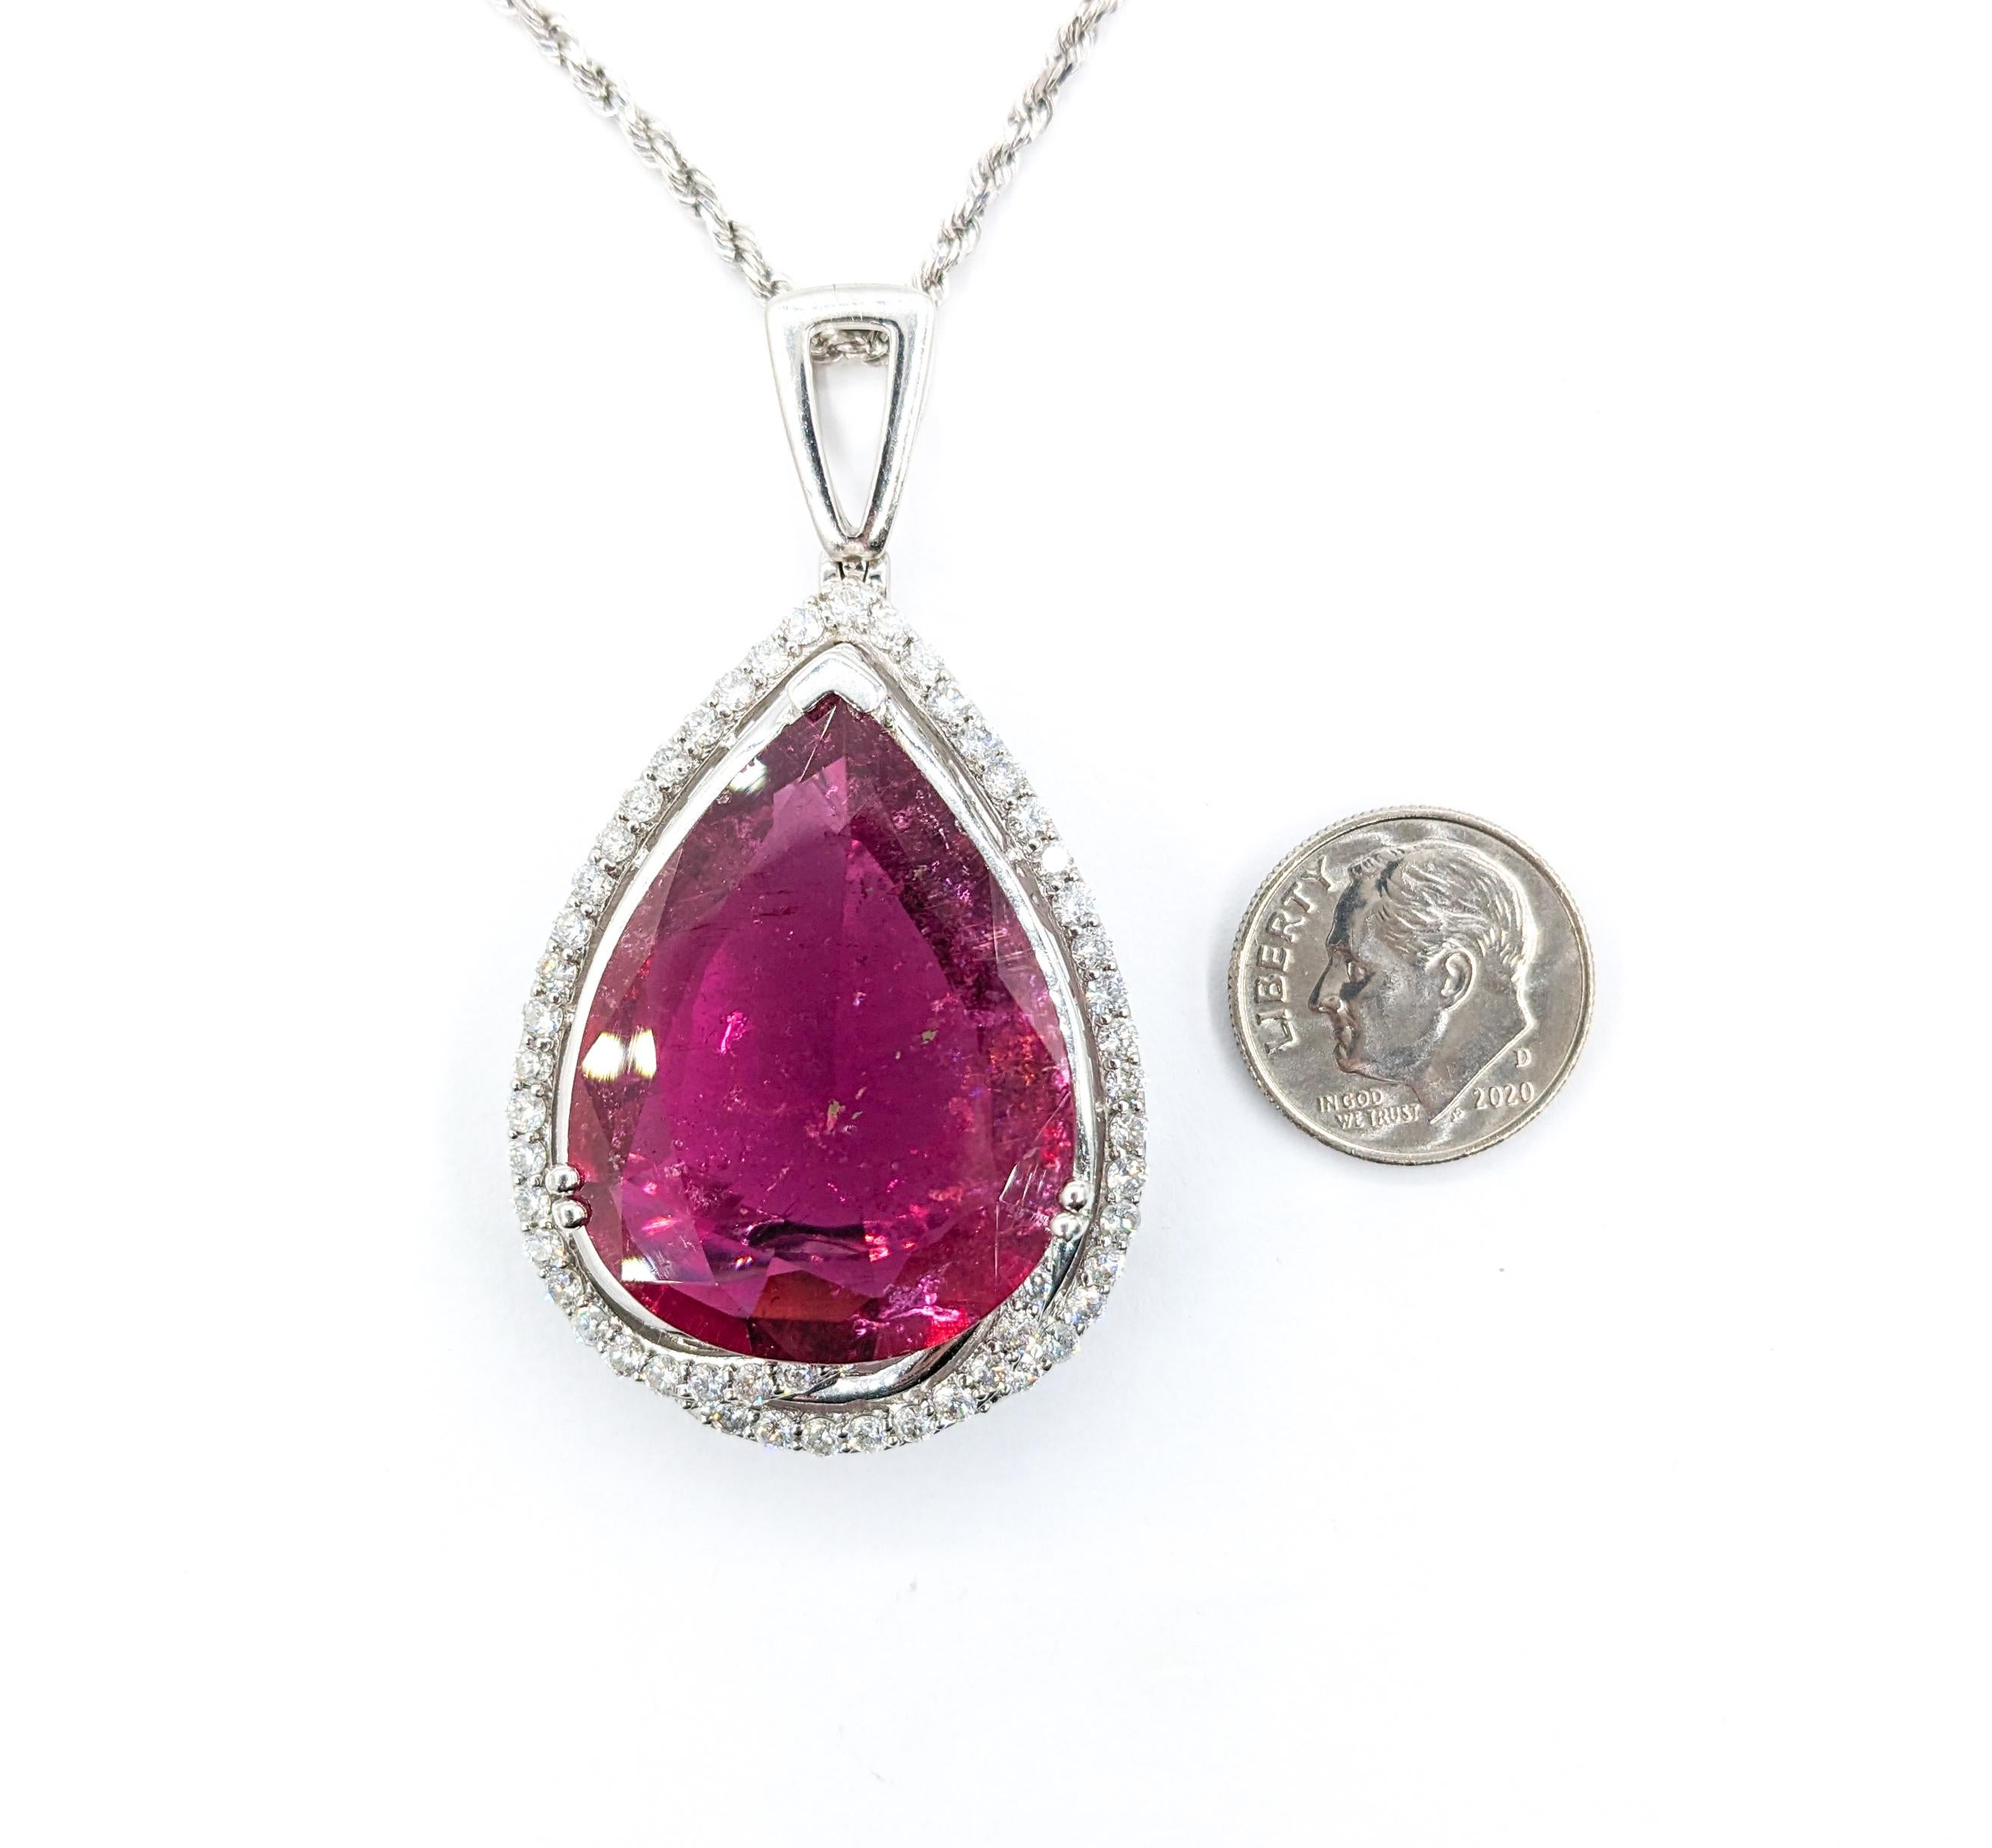 Women's 35.75ct Pink GIA Rubellite Tourmaline Pear & Diamond Necklace In Platinum For Sale